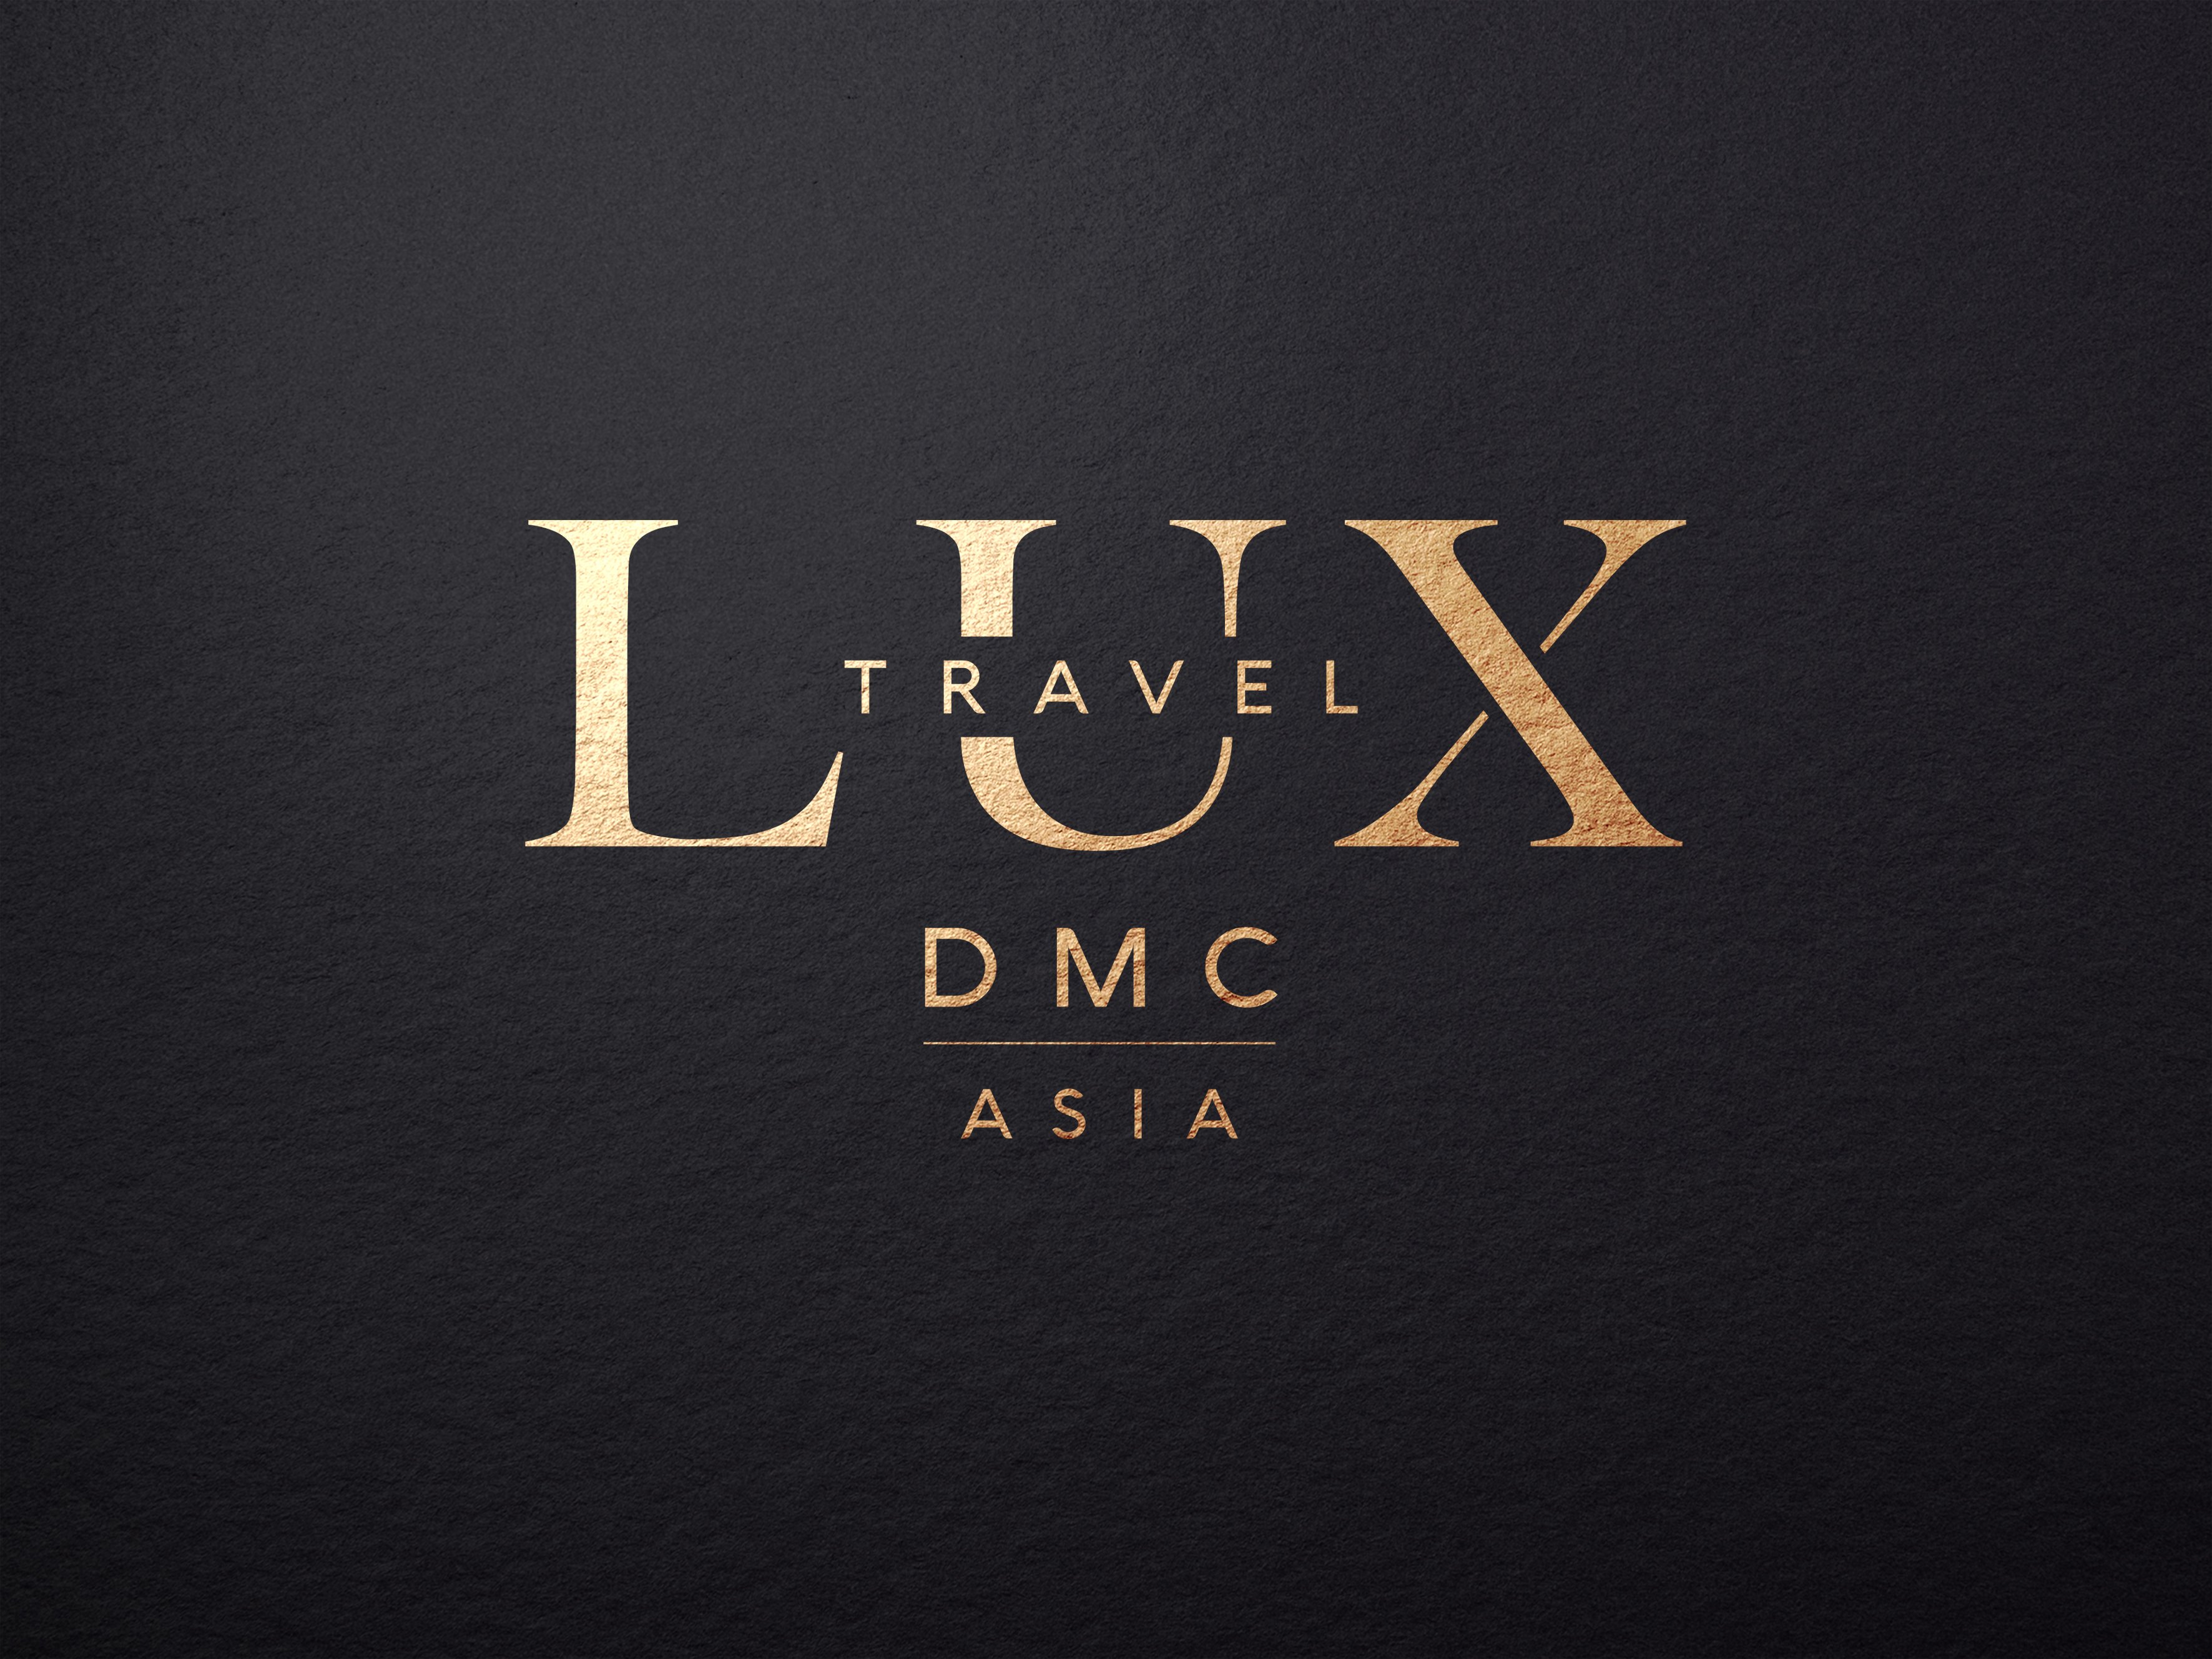 Vietnam’s First Luxury Travel Company Has Re-Branded to Lux Travel DMC ...